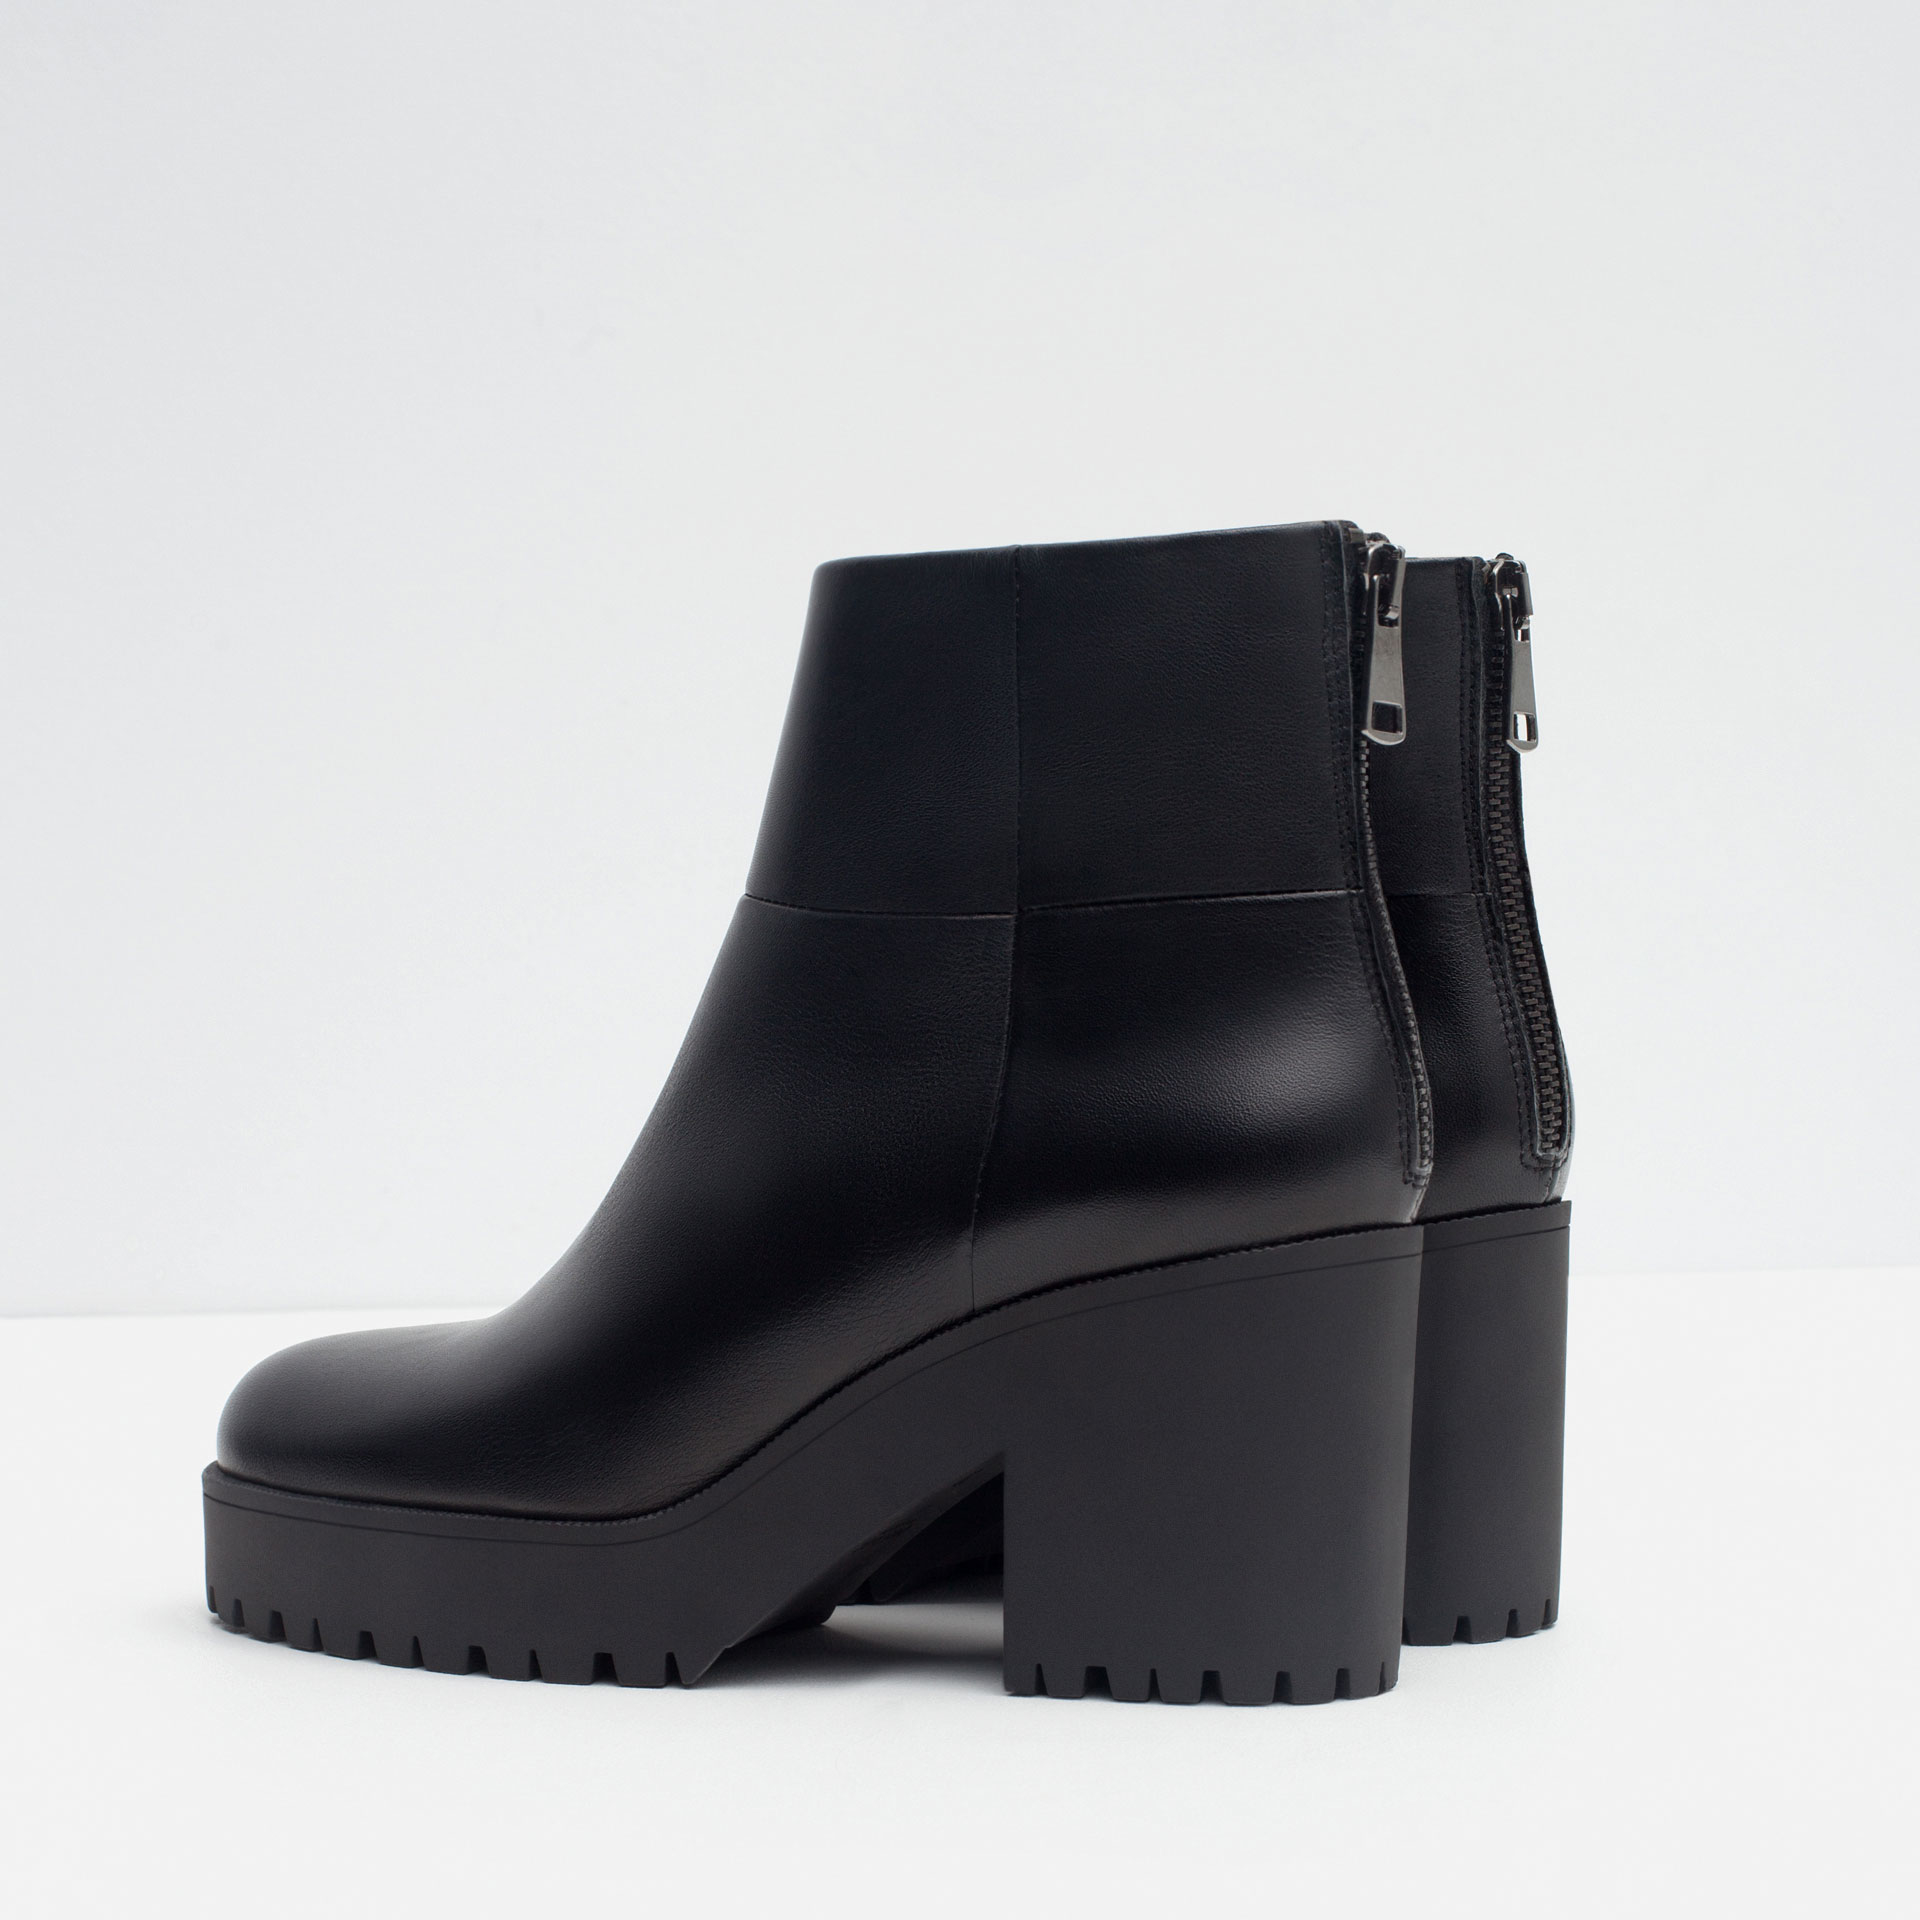 Zara High Heel Leather Ankle Boots With Track Sole in Black | Lyst